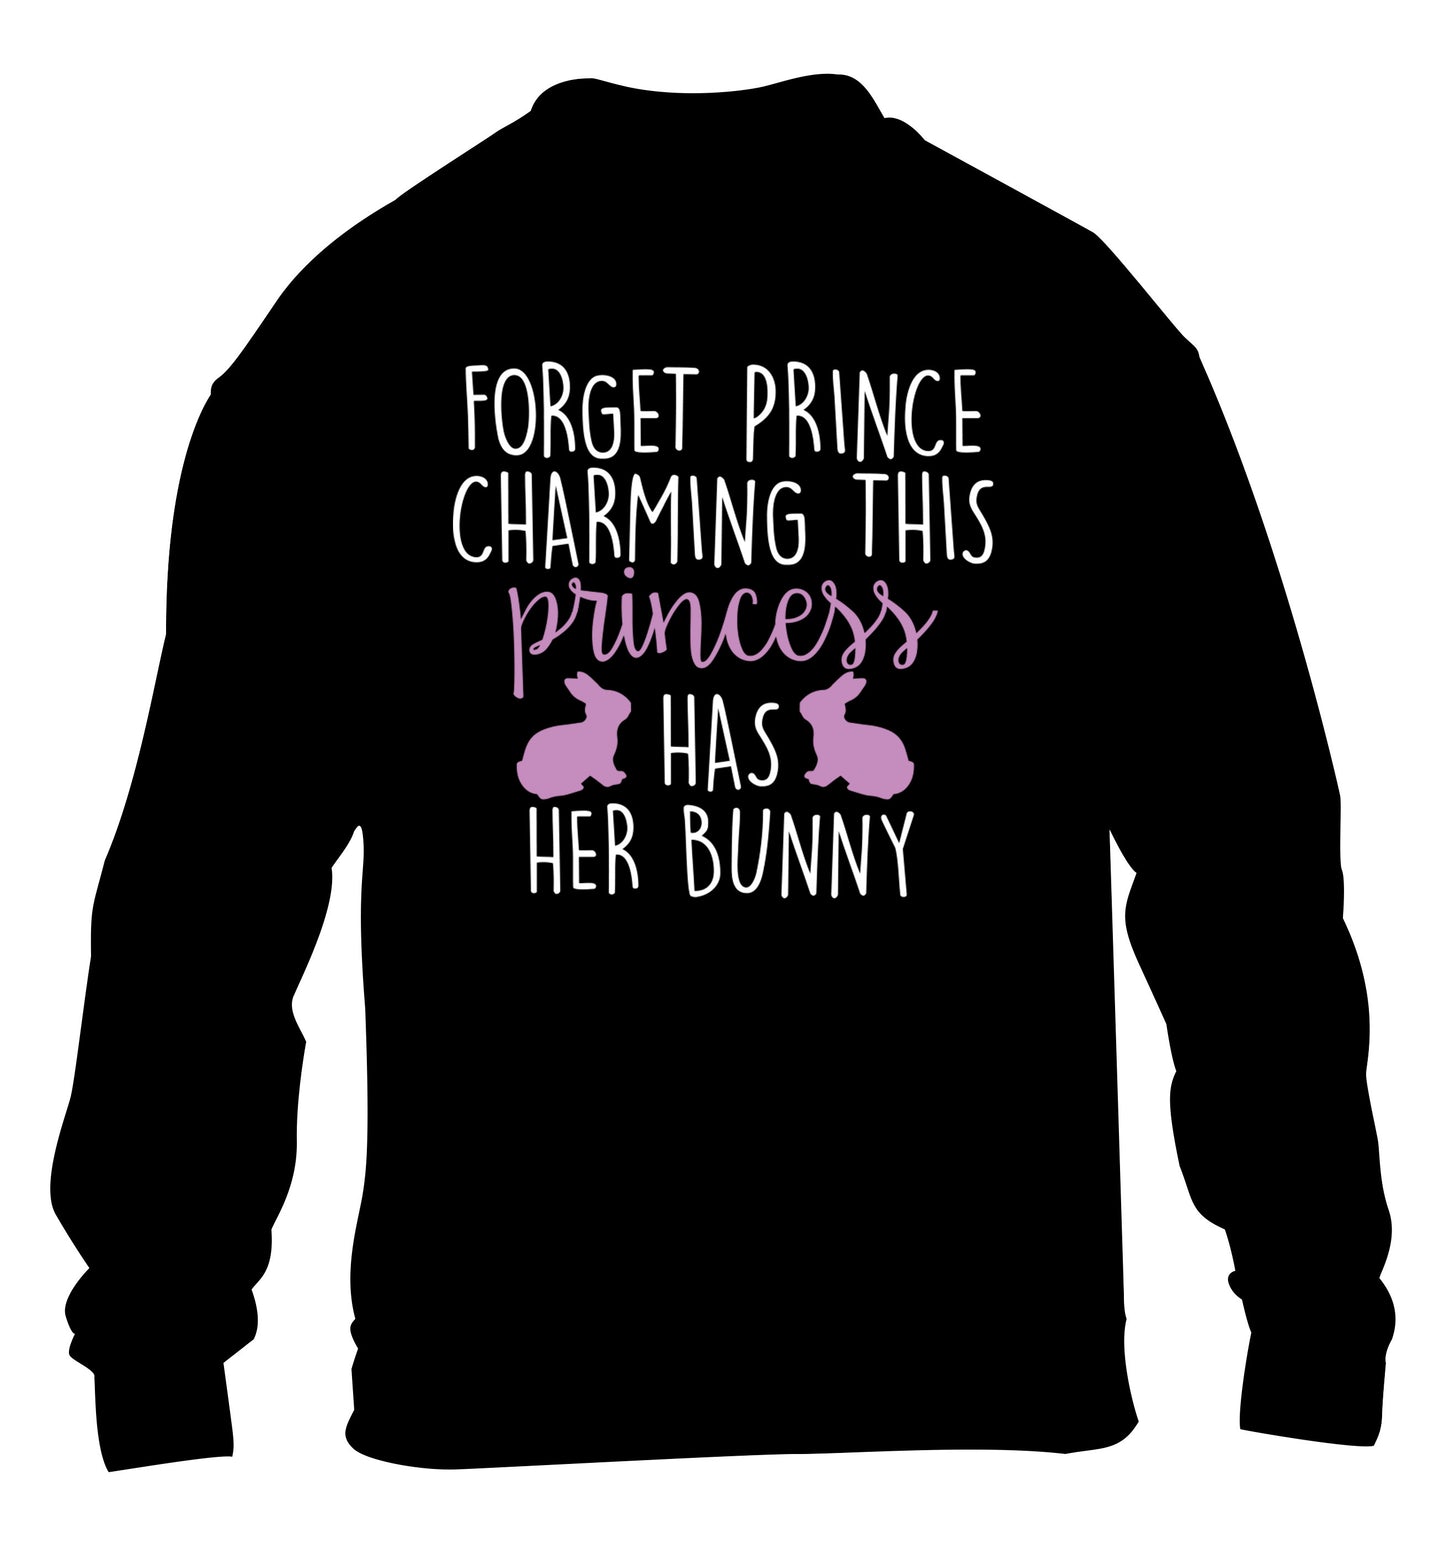 Forget prince charming this princess has her bunny children's black  sweater 12-14 Years